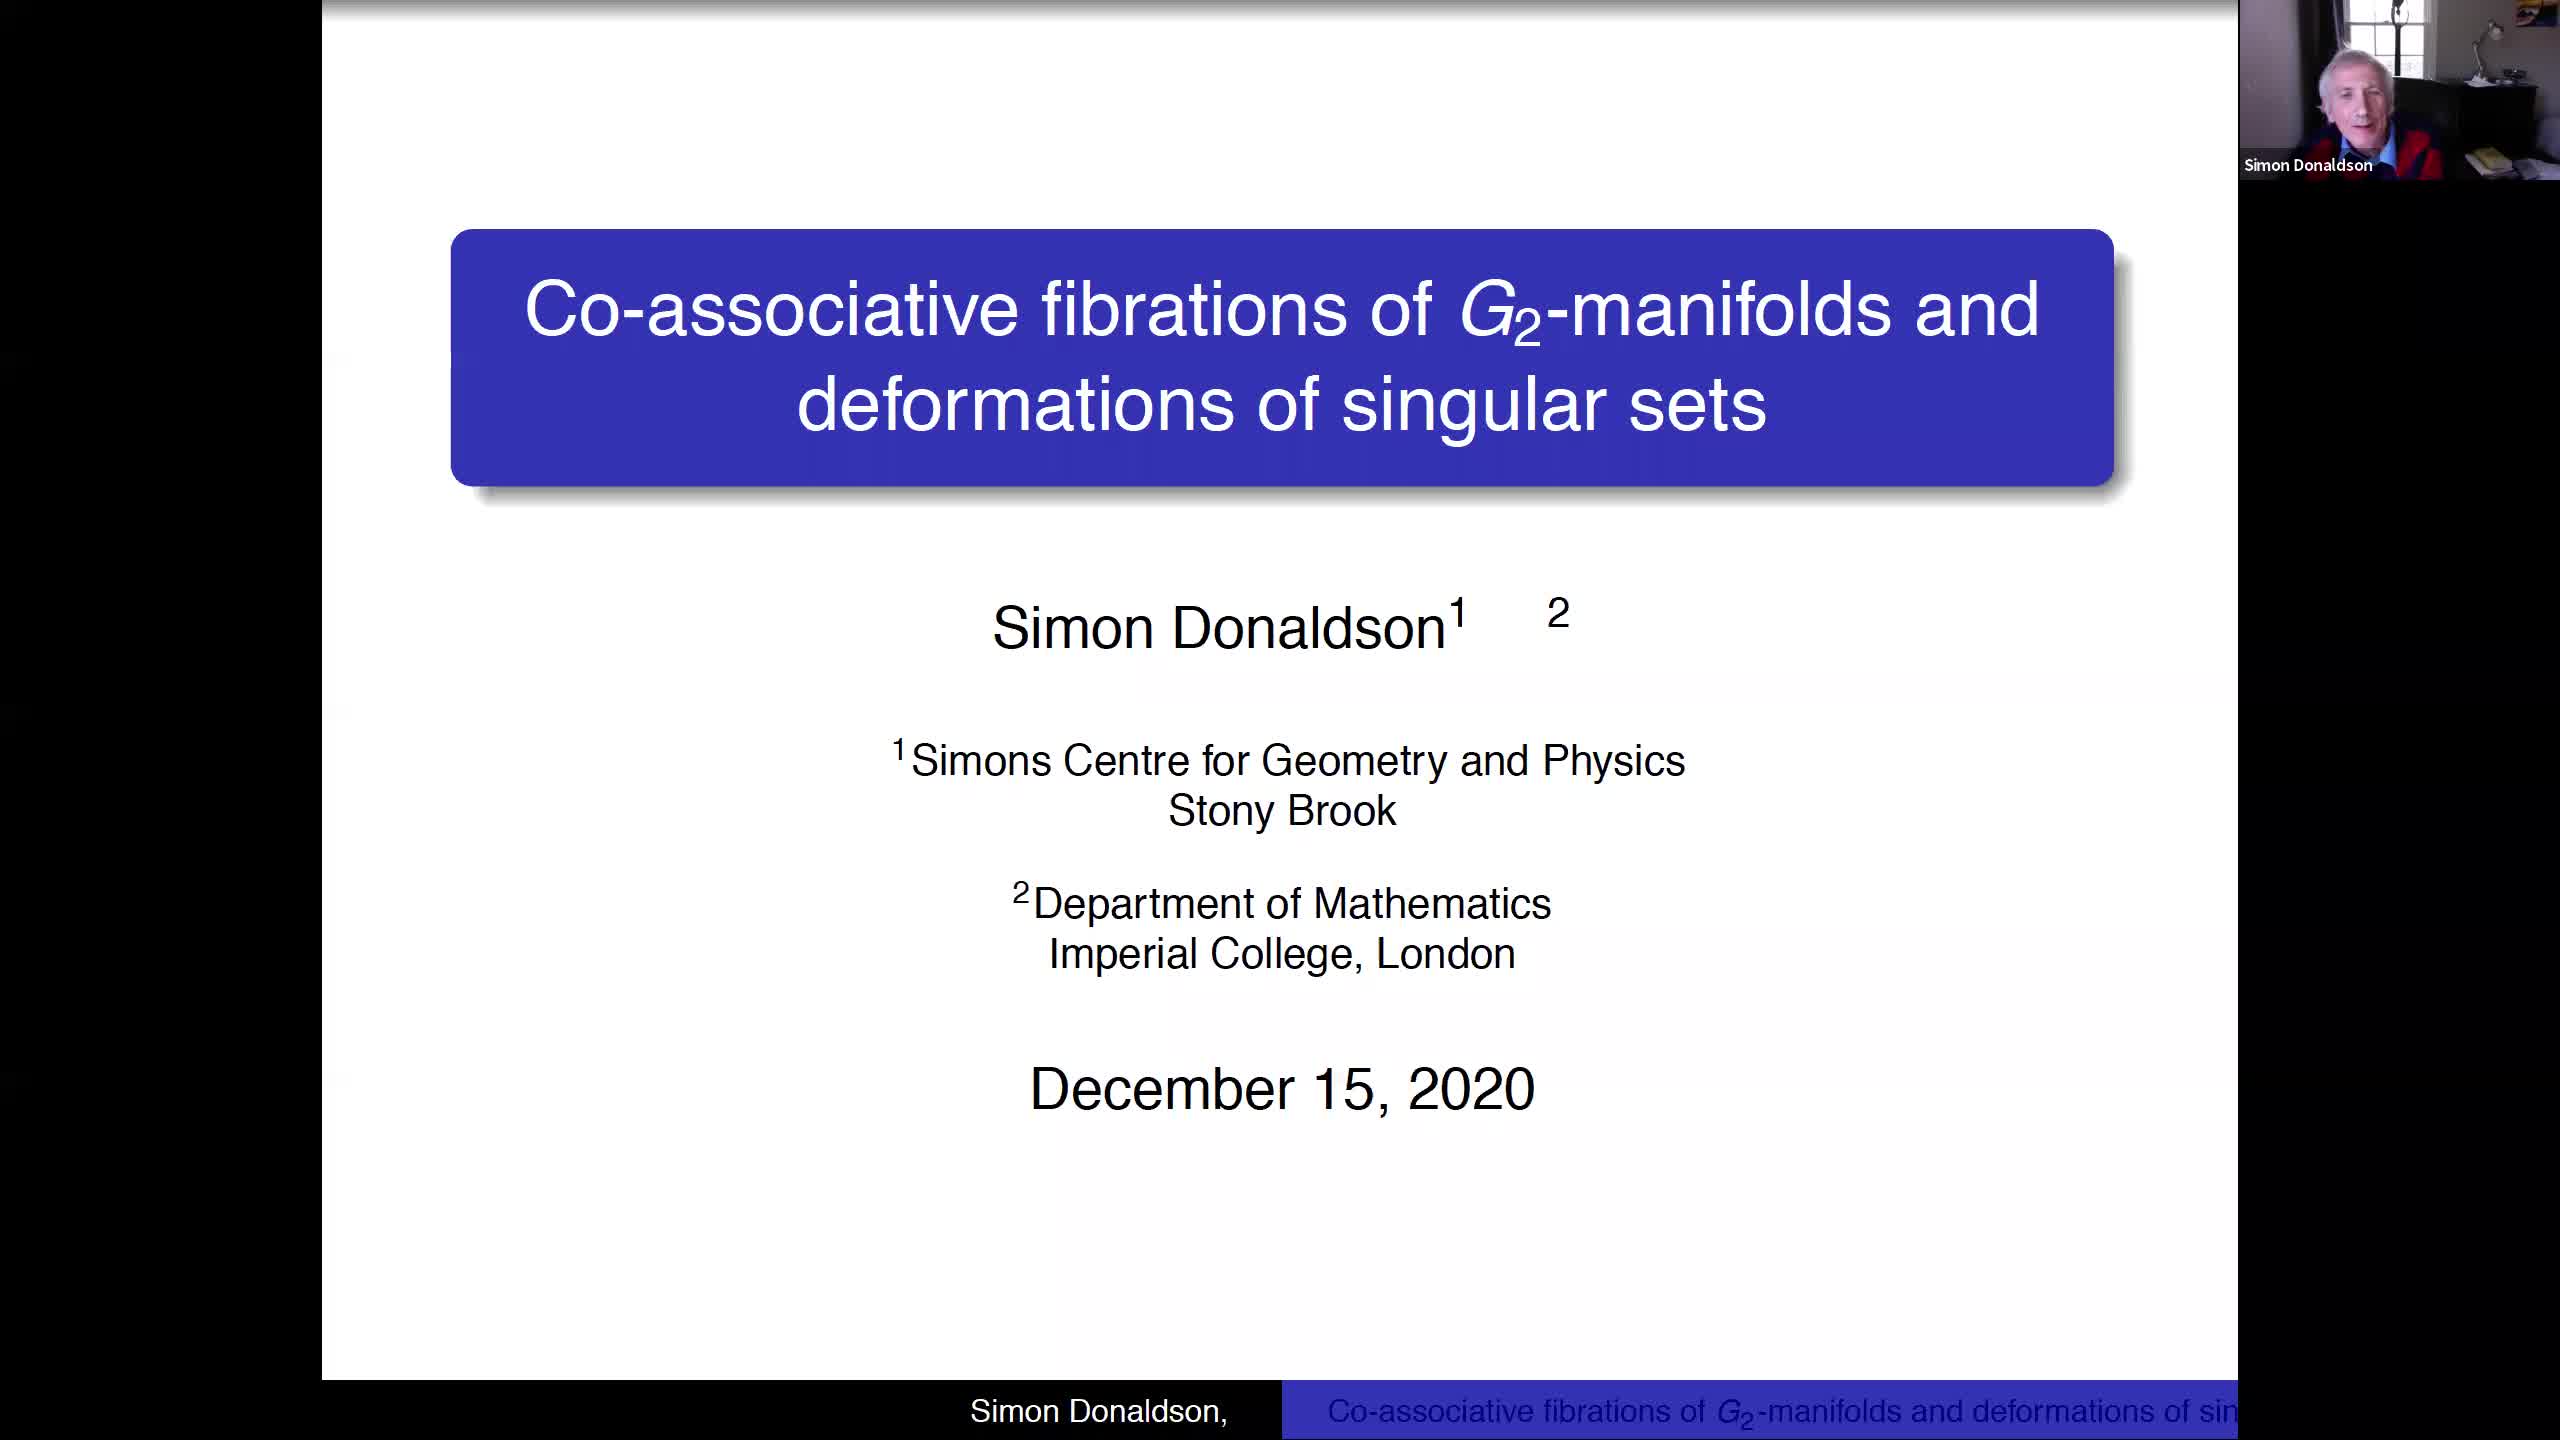 2020.12.15 Co-associative fibrations of G_2-manifolds and deformations of singular sets